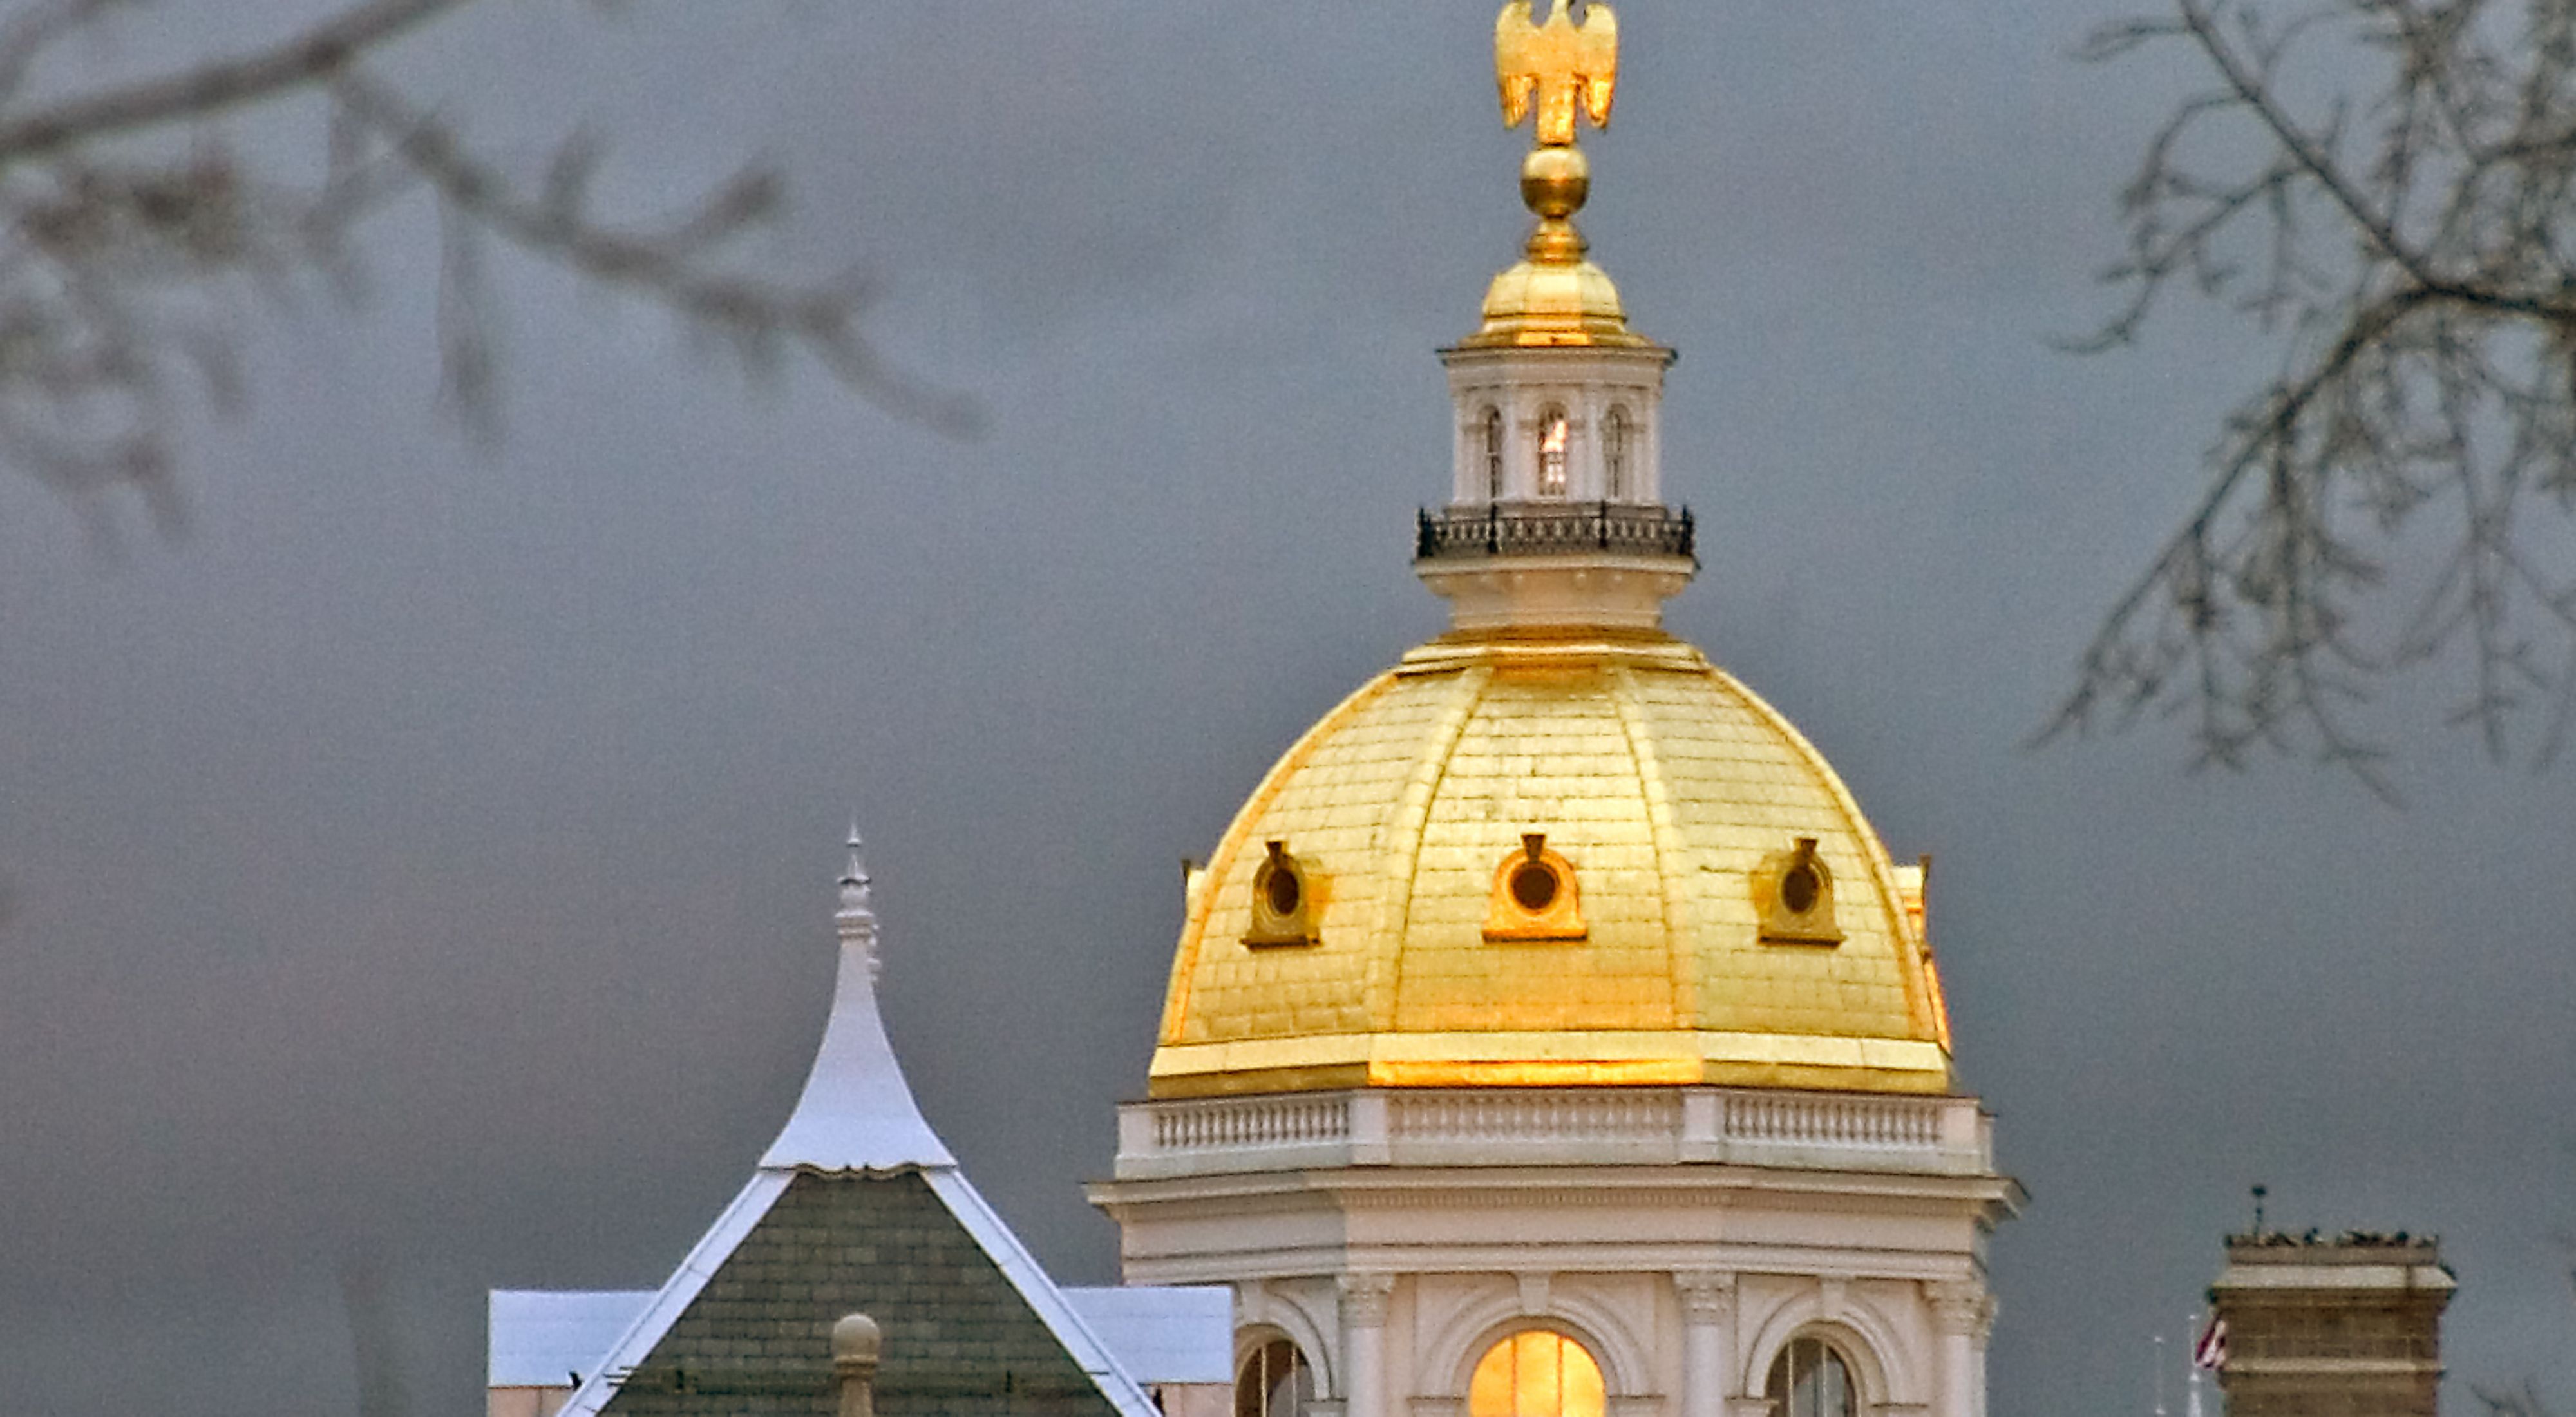 A golden dome that sits atop the New Hampshire State House.